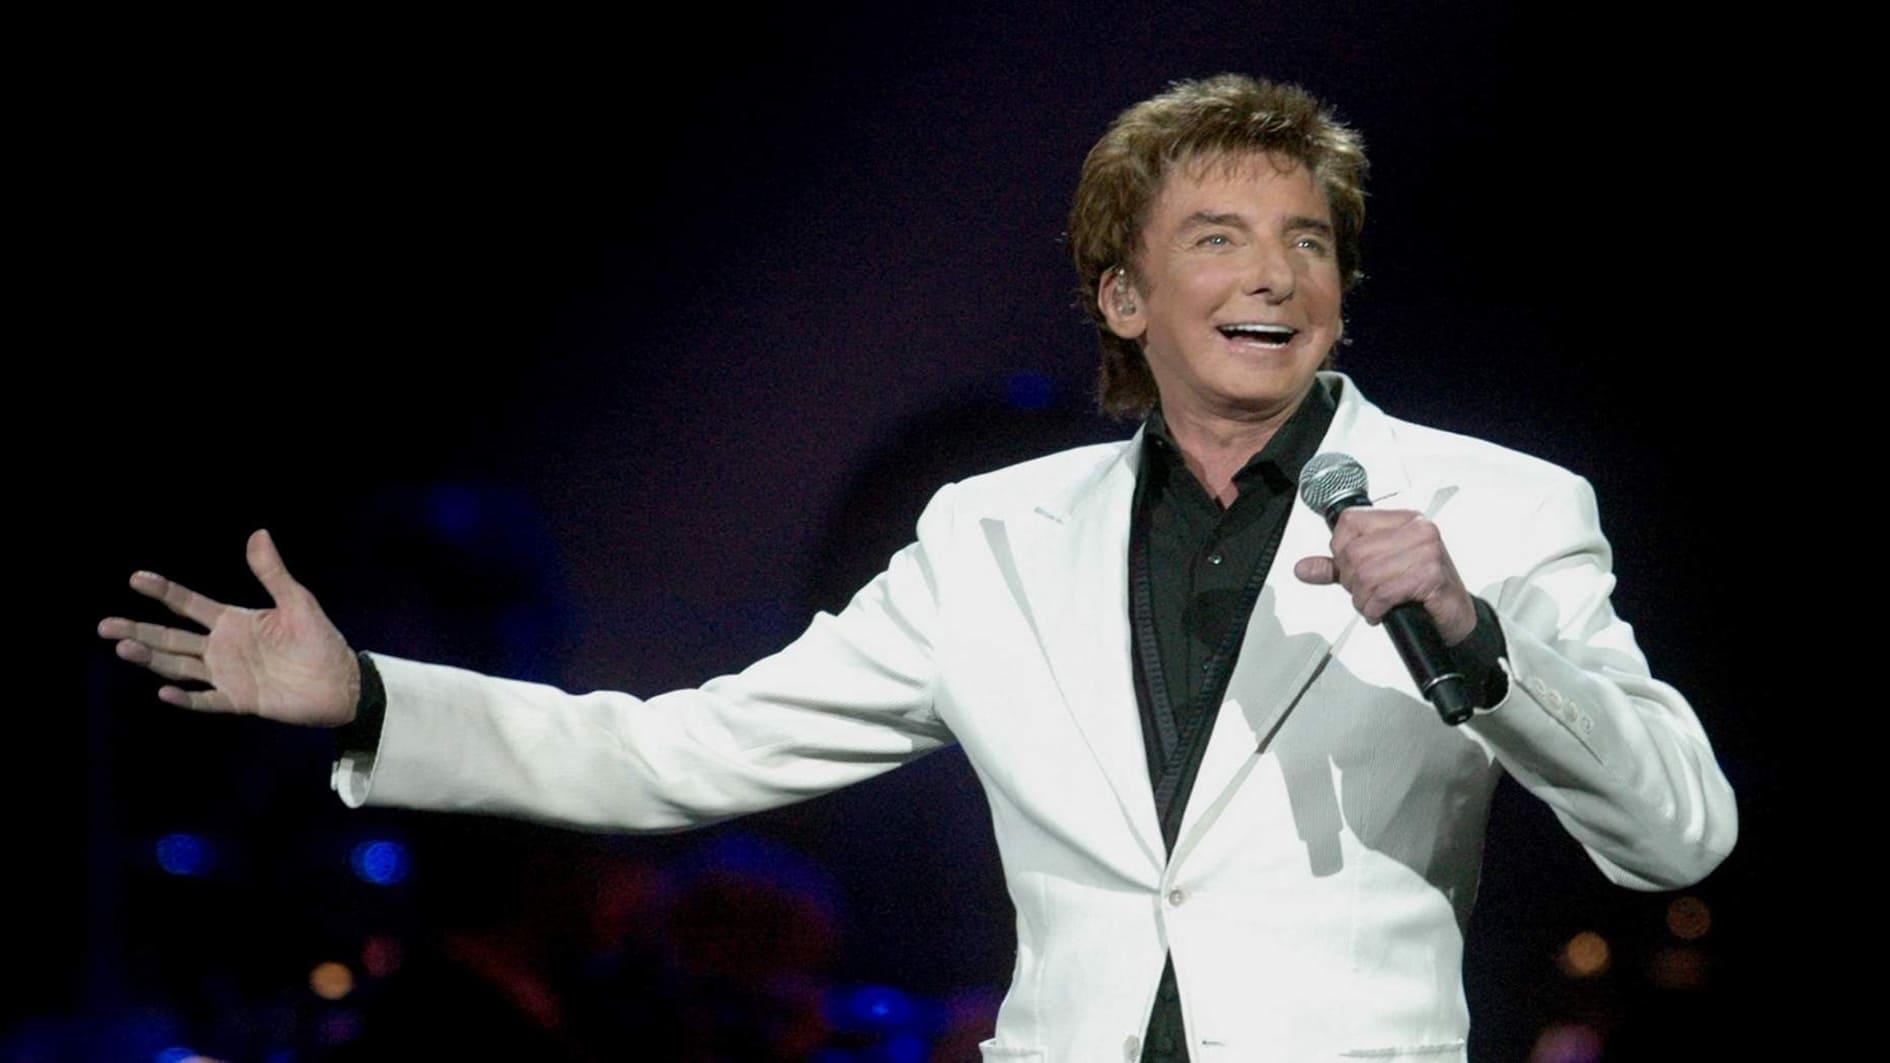 Barry Manilow: Greatest Hits & Then Some backdrop